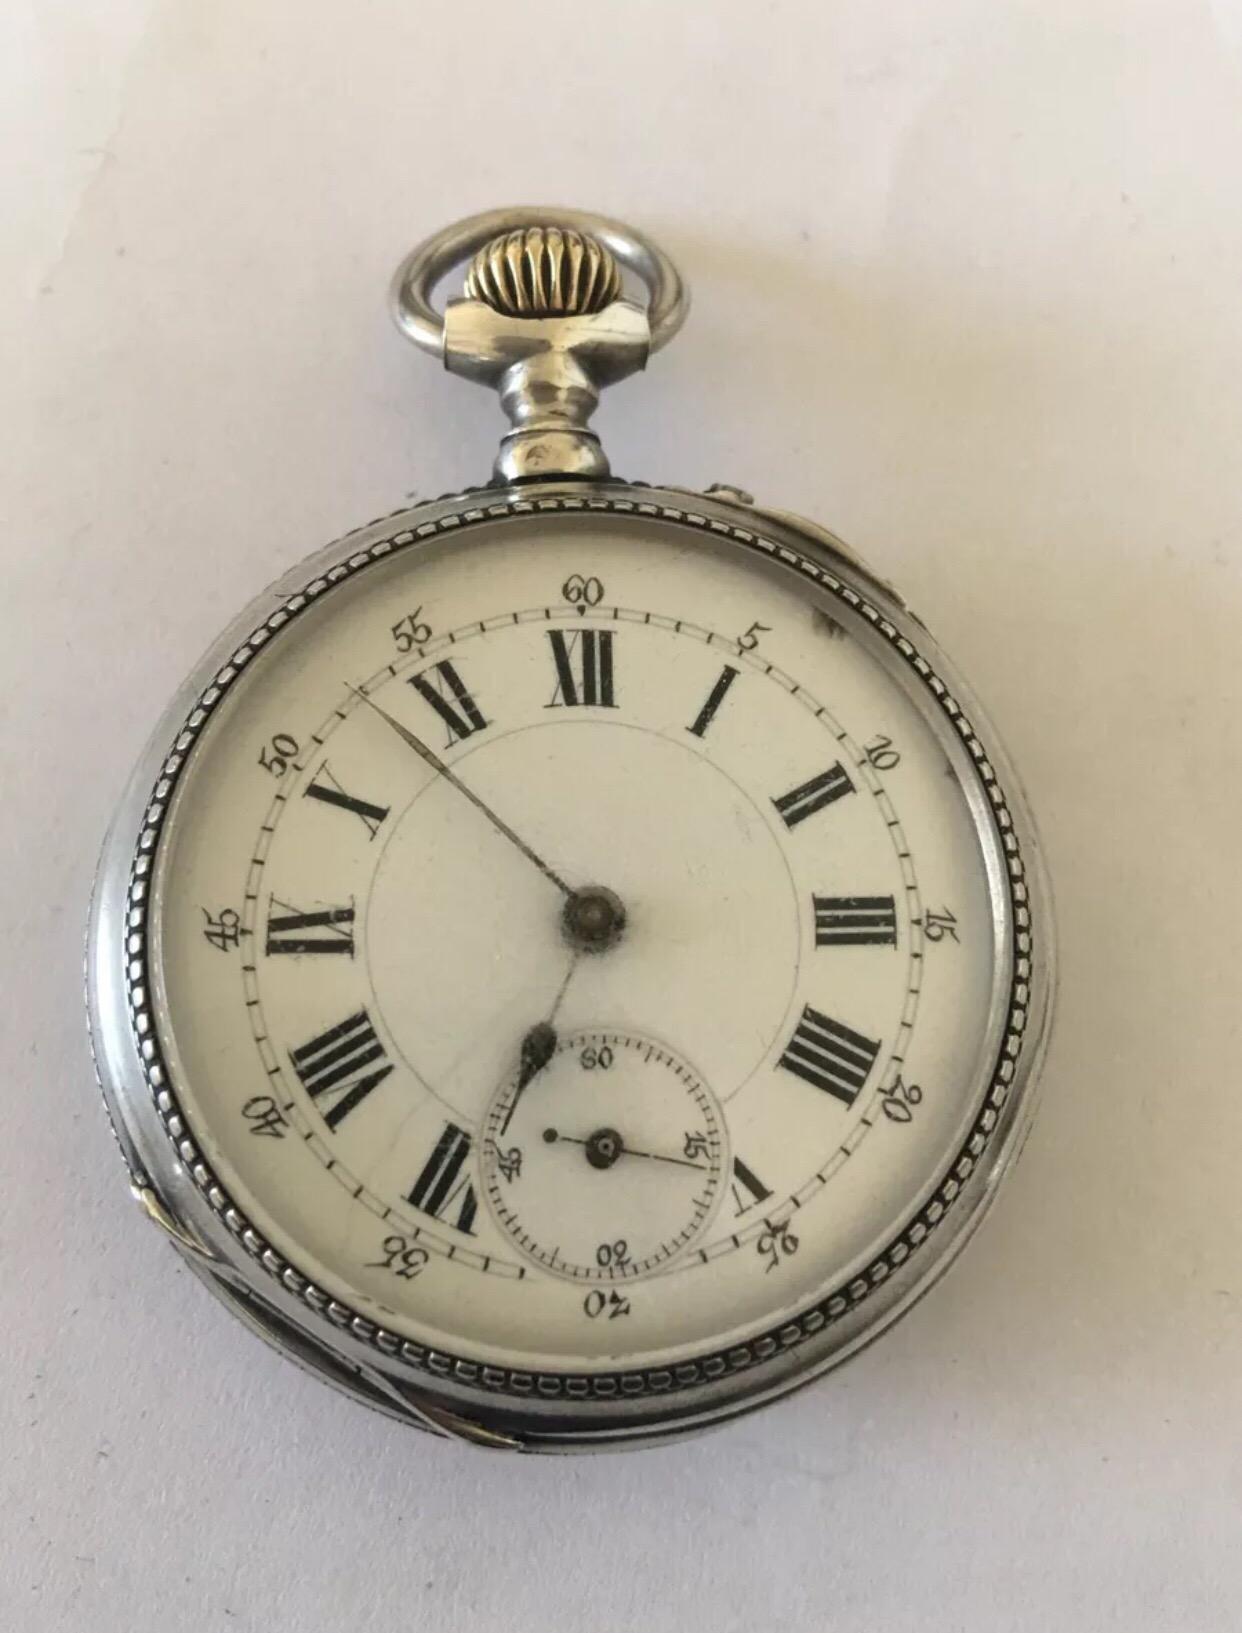 This Antique silver nicely engraved Pocket Watch is in good working condition and it is ticking well.